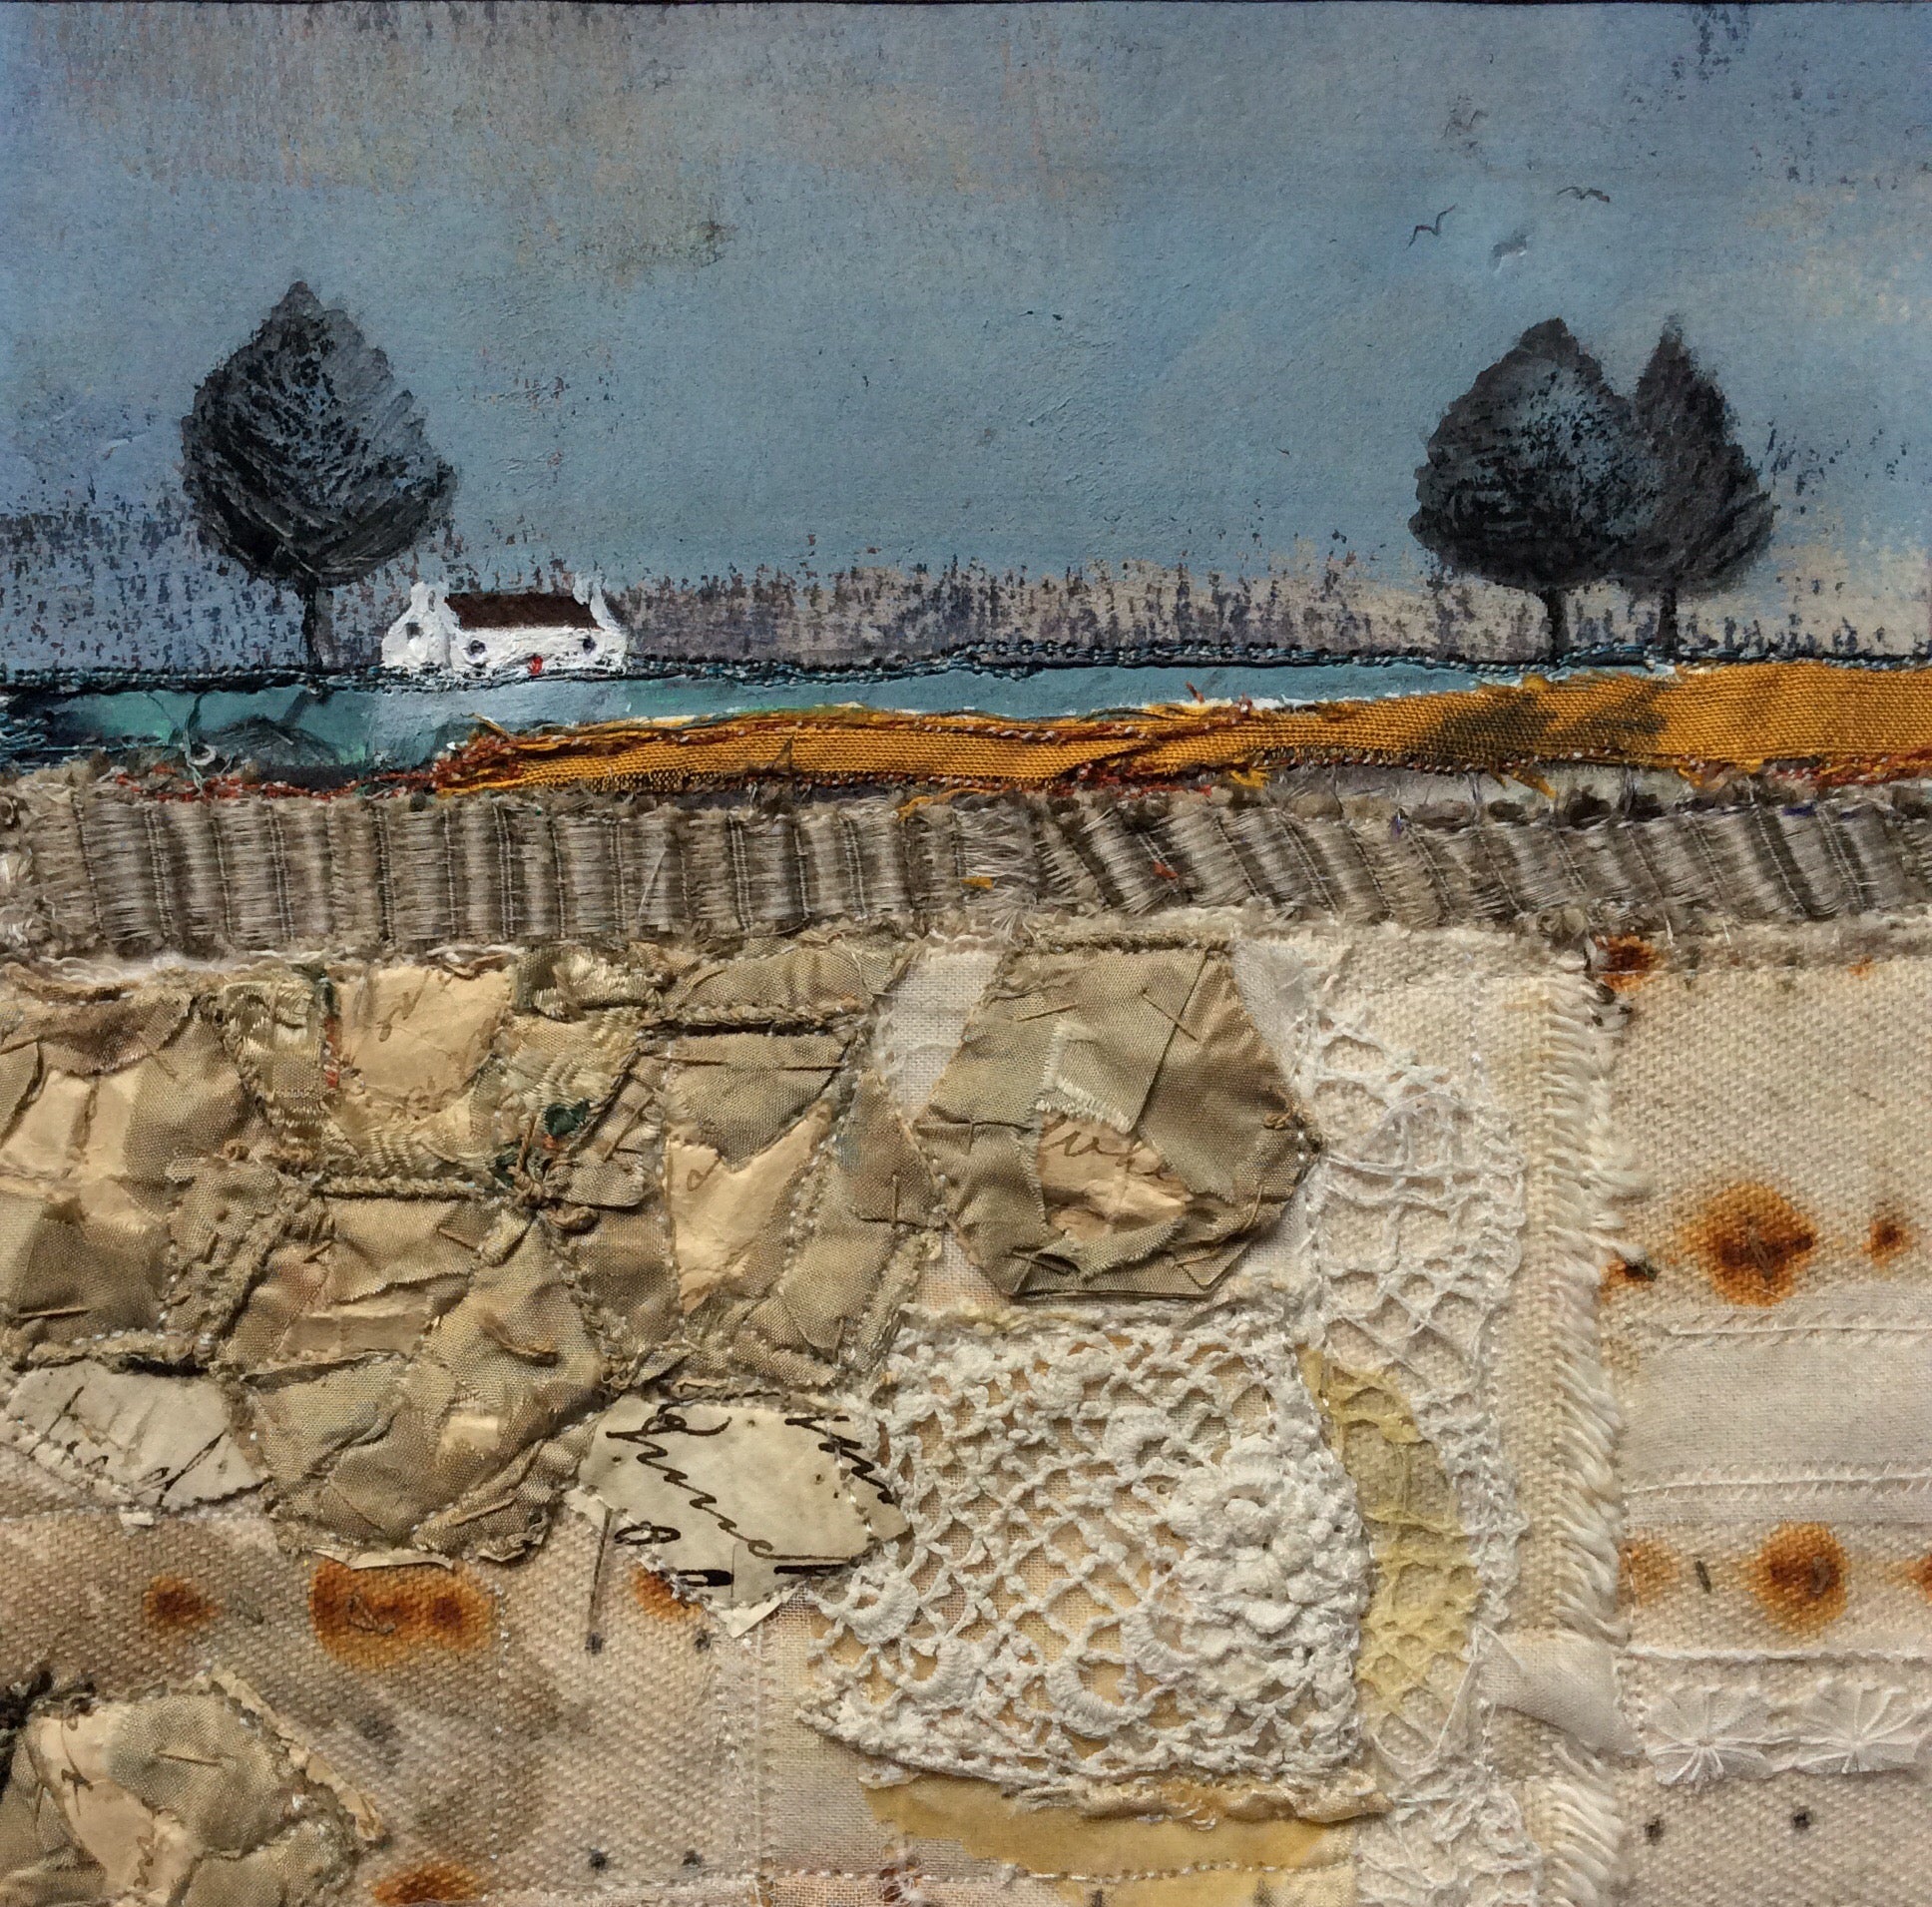 Mixed Media Art By Louise O'Hara - "Reflections in the Tarn”